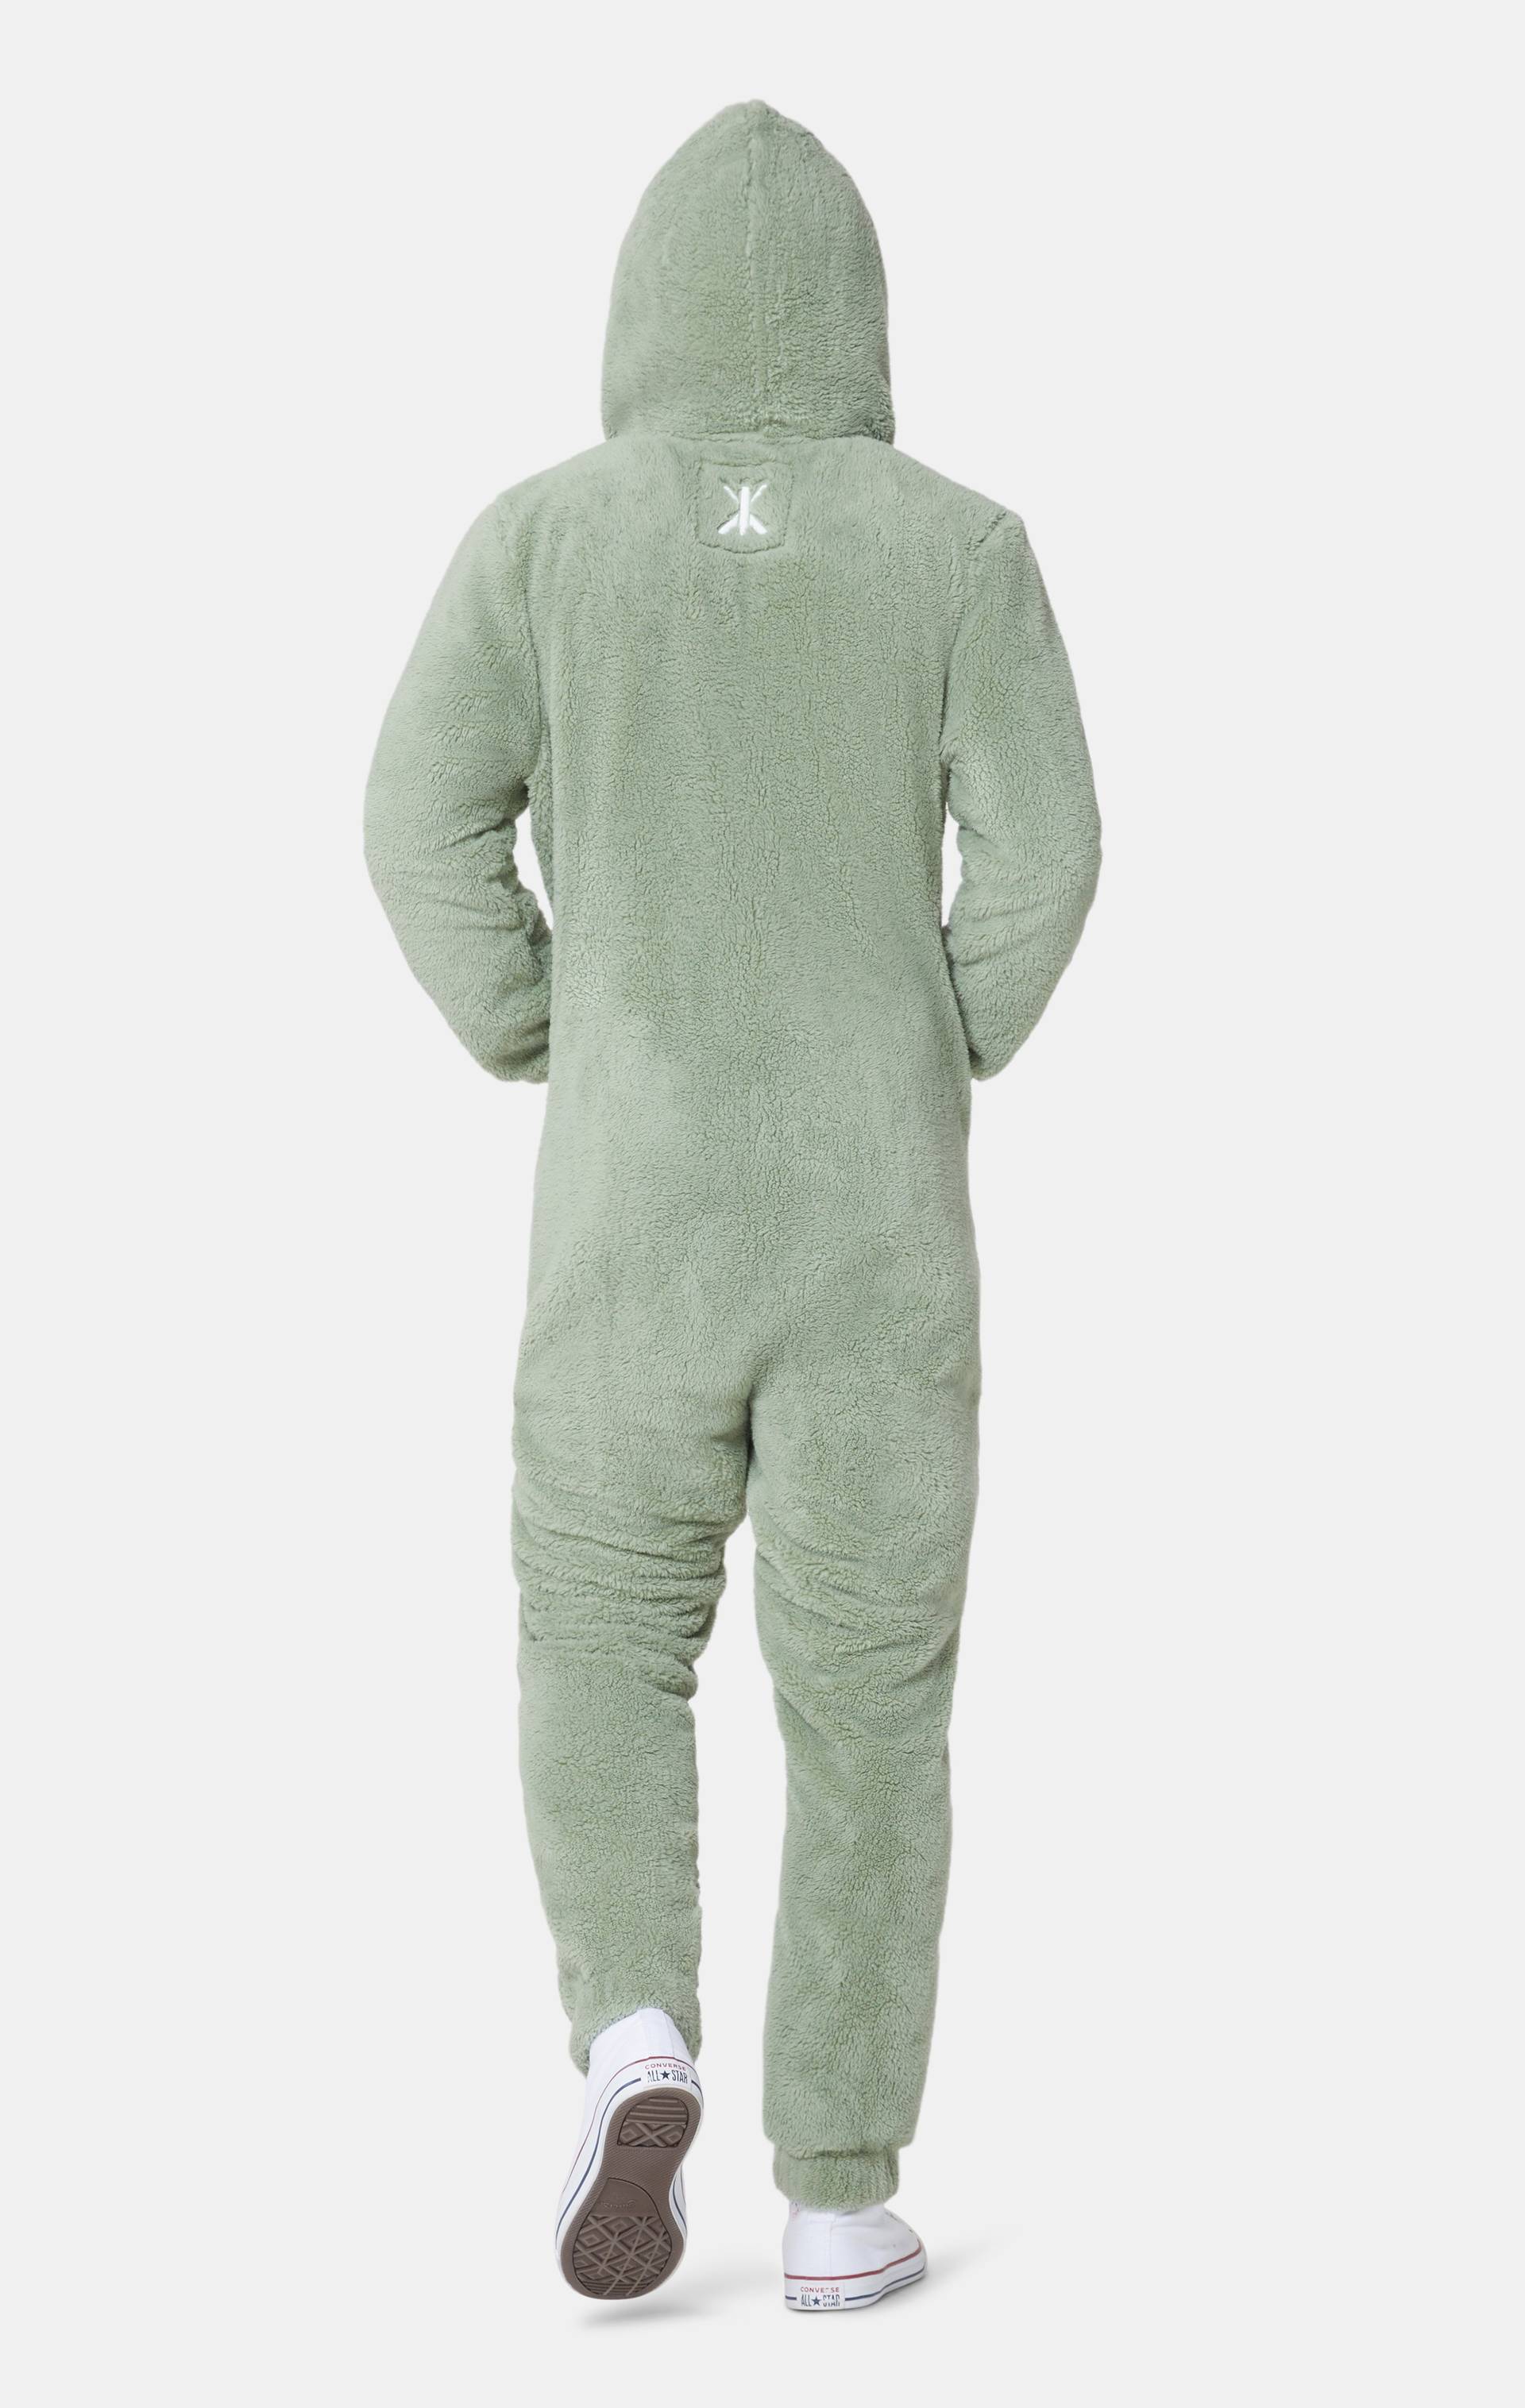 Onepiece The Puppy Jumpsuit Green - 6